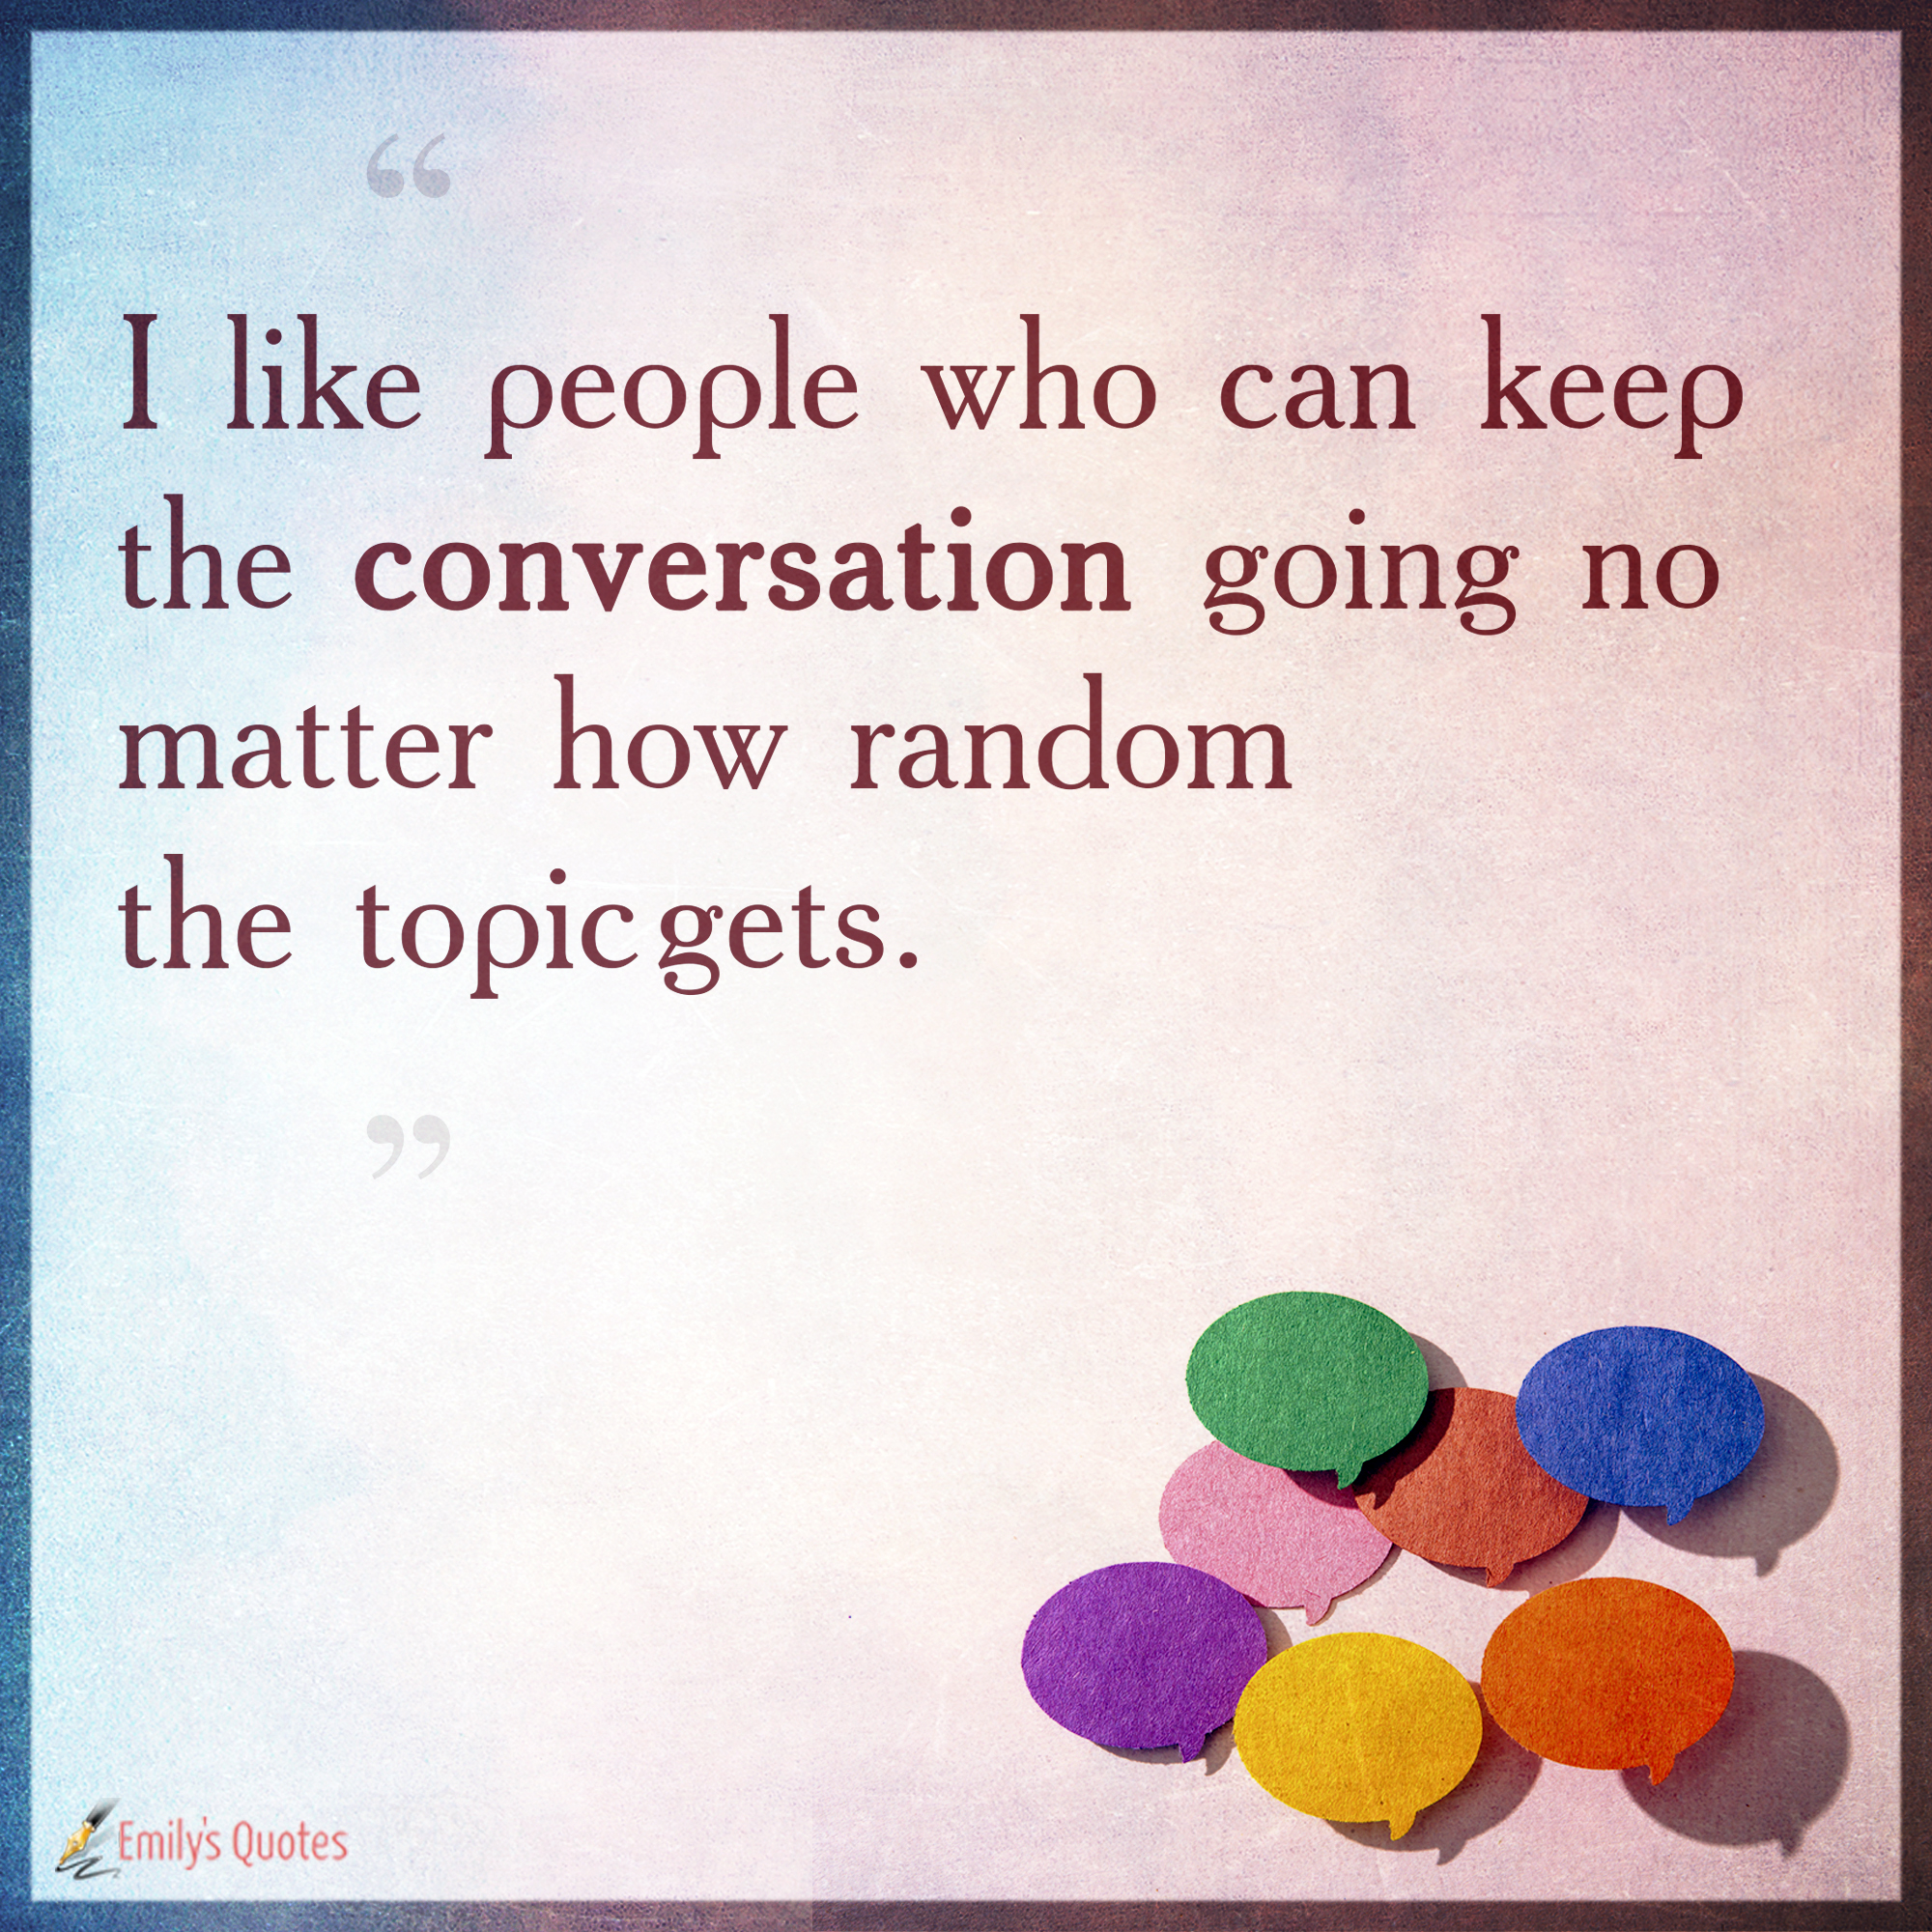 I like people who can keep the conversation going no matter how random the topic gets